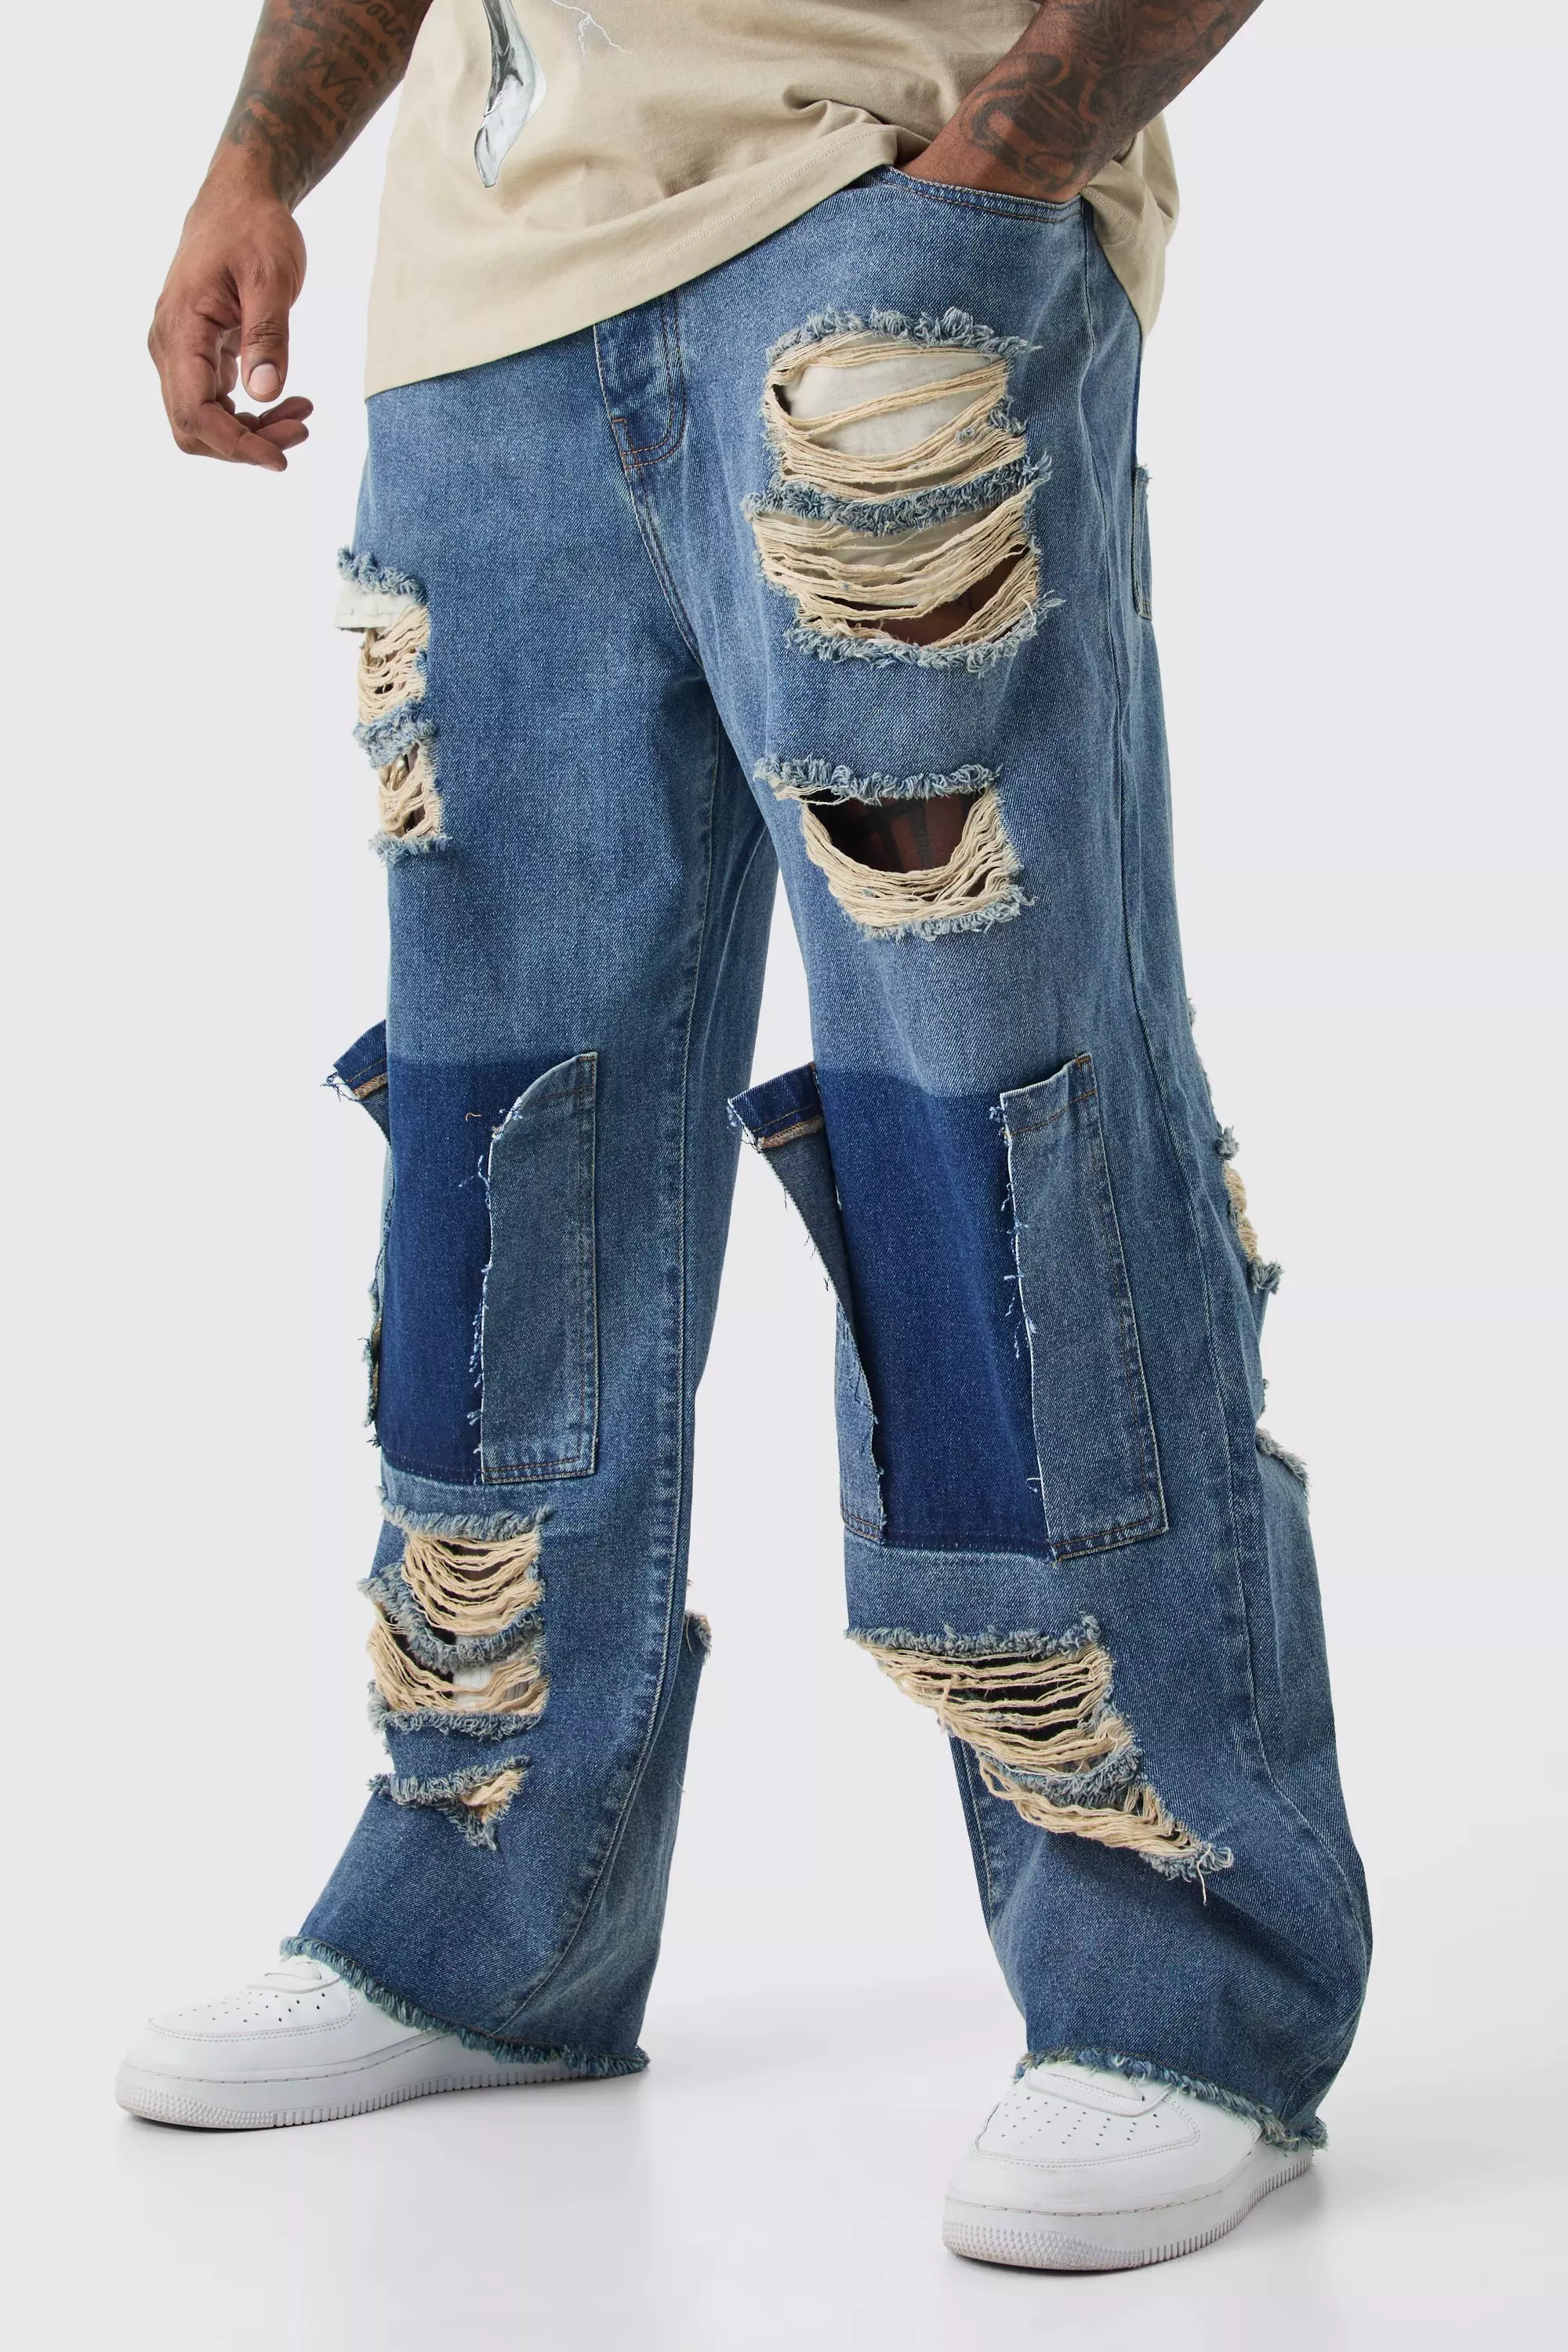 Plus Relaxed Rigid Distressed Jeans Antique wash